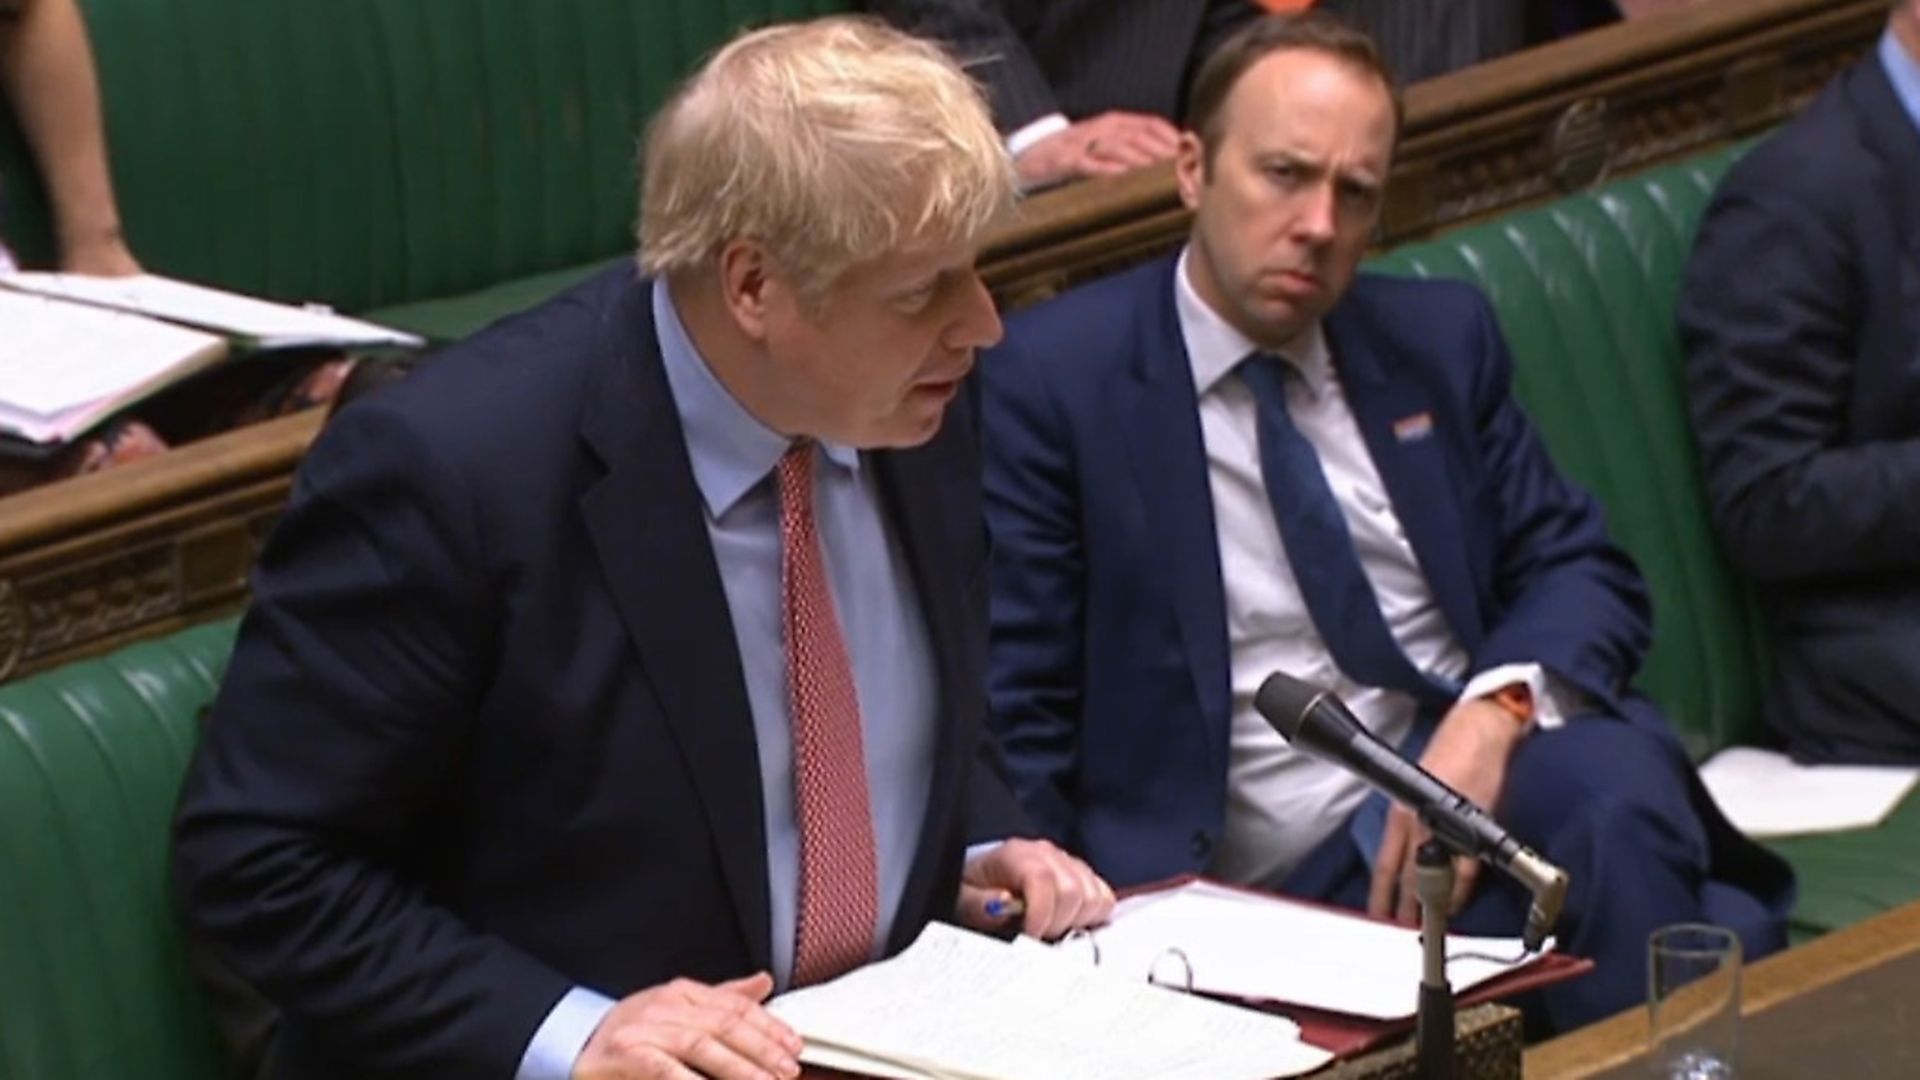 Health Secretary Matt Hancock watches Prime Minister Boris Johnson speak during Prime Minister's Questions in the House of Commons. Photograph: House of Commons/PA Wire. - Credit: PA